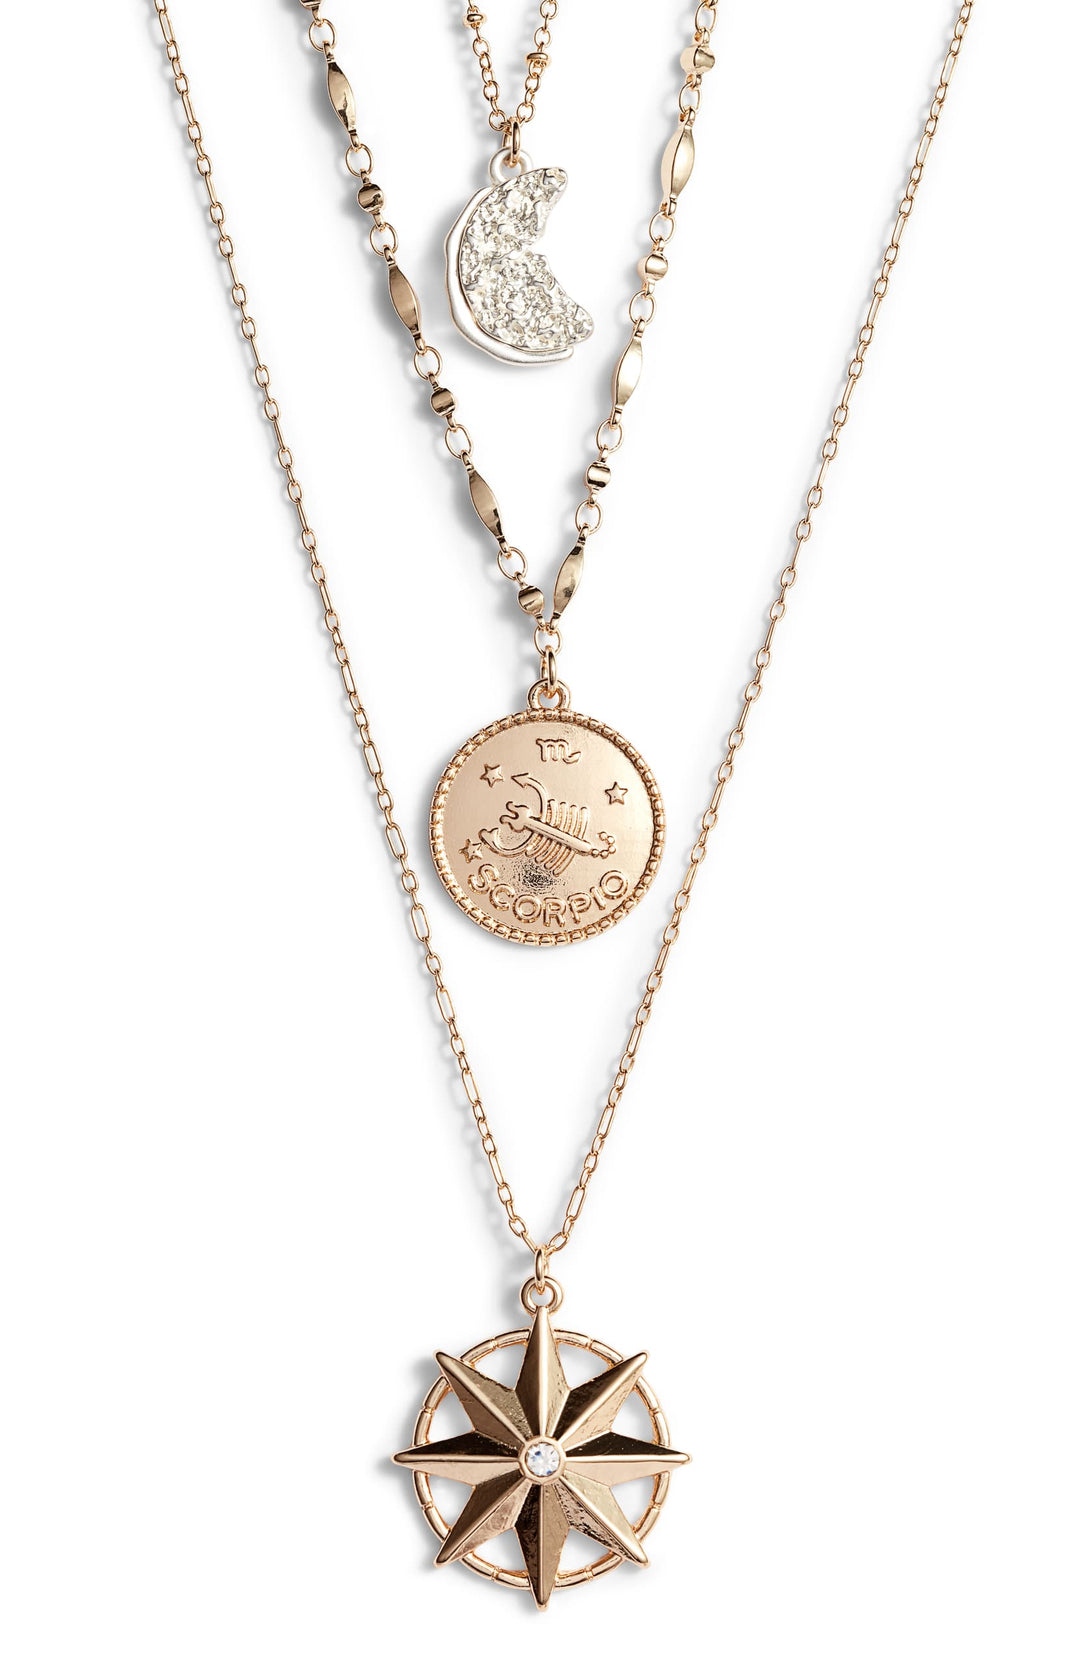 Astrological Charm Necklace - Scorpio